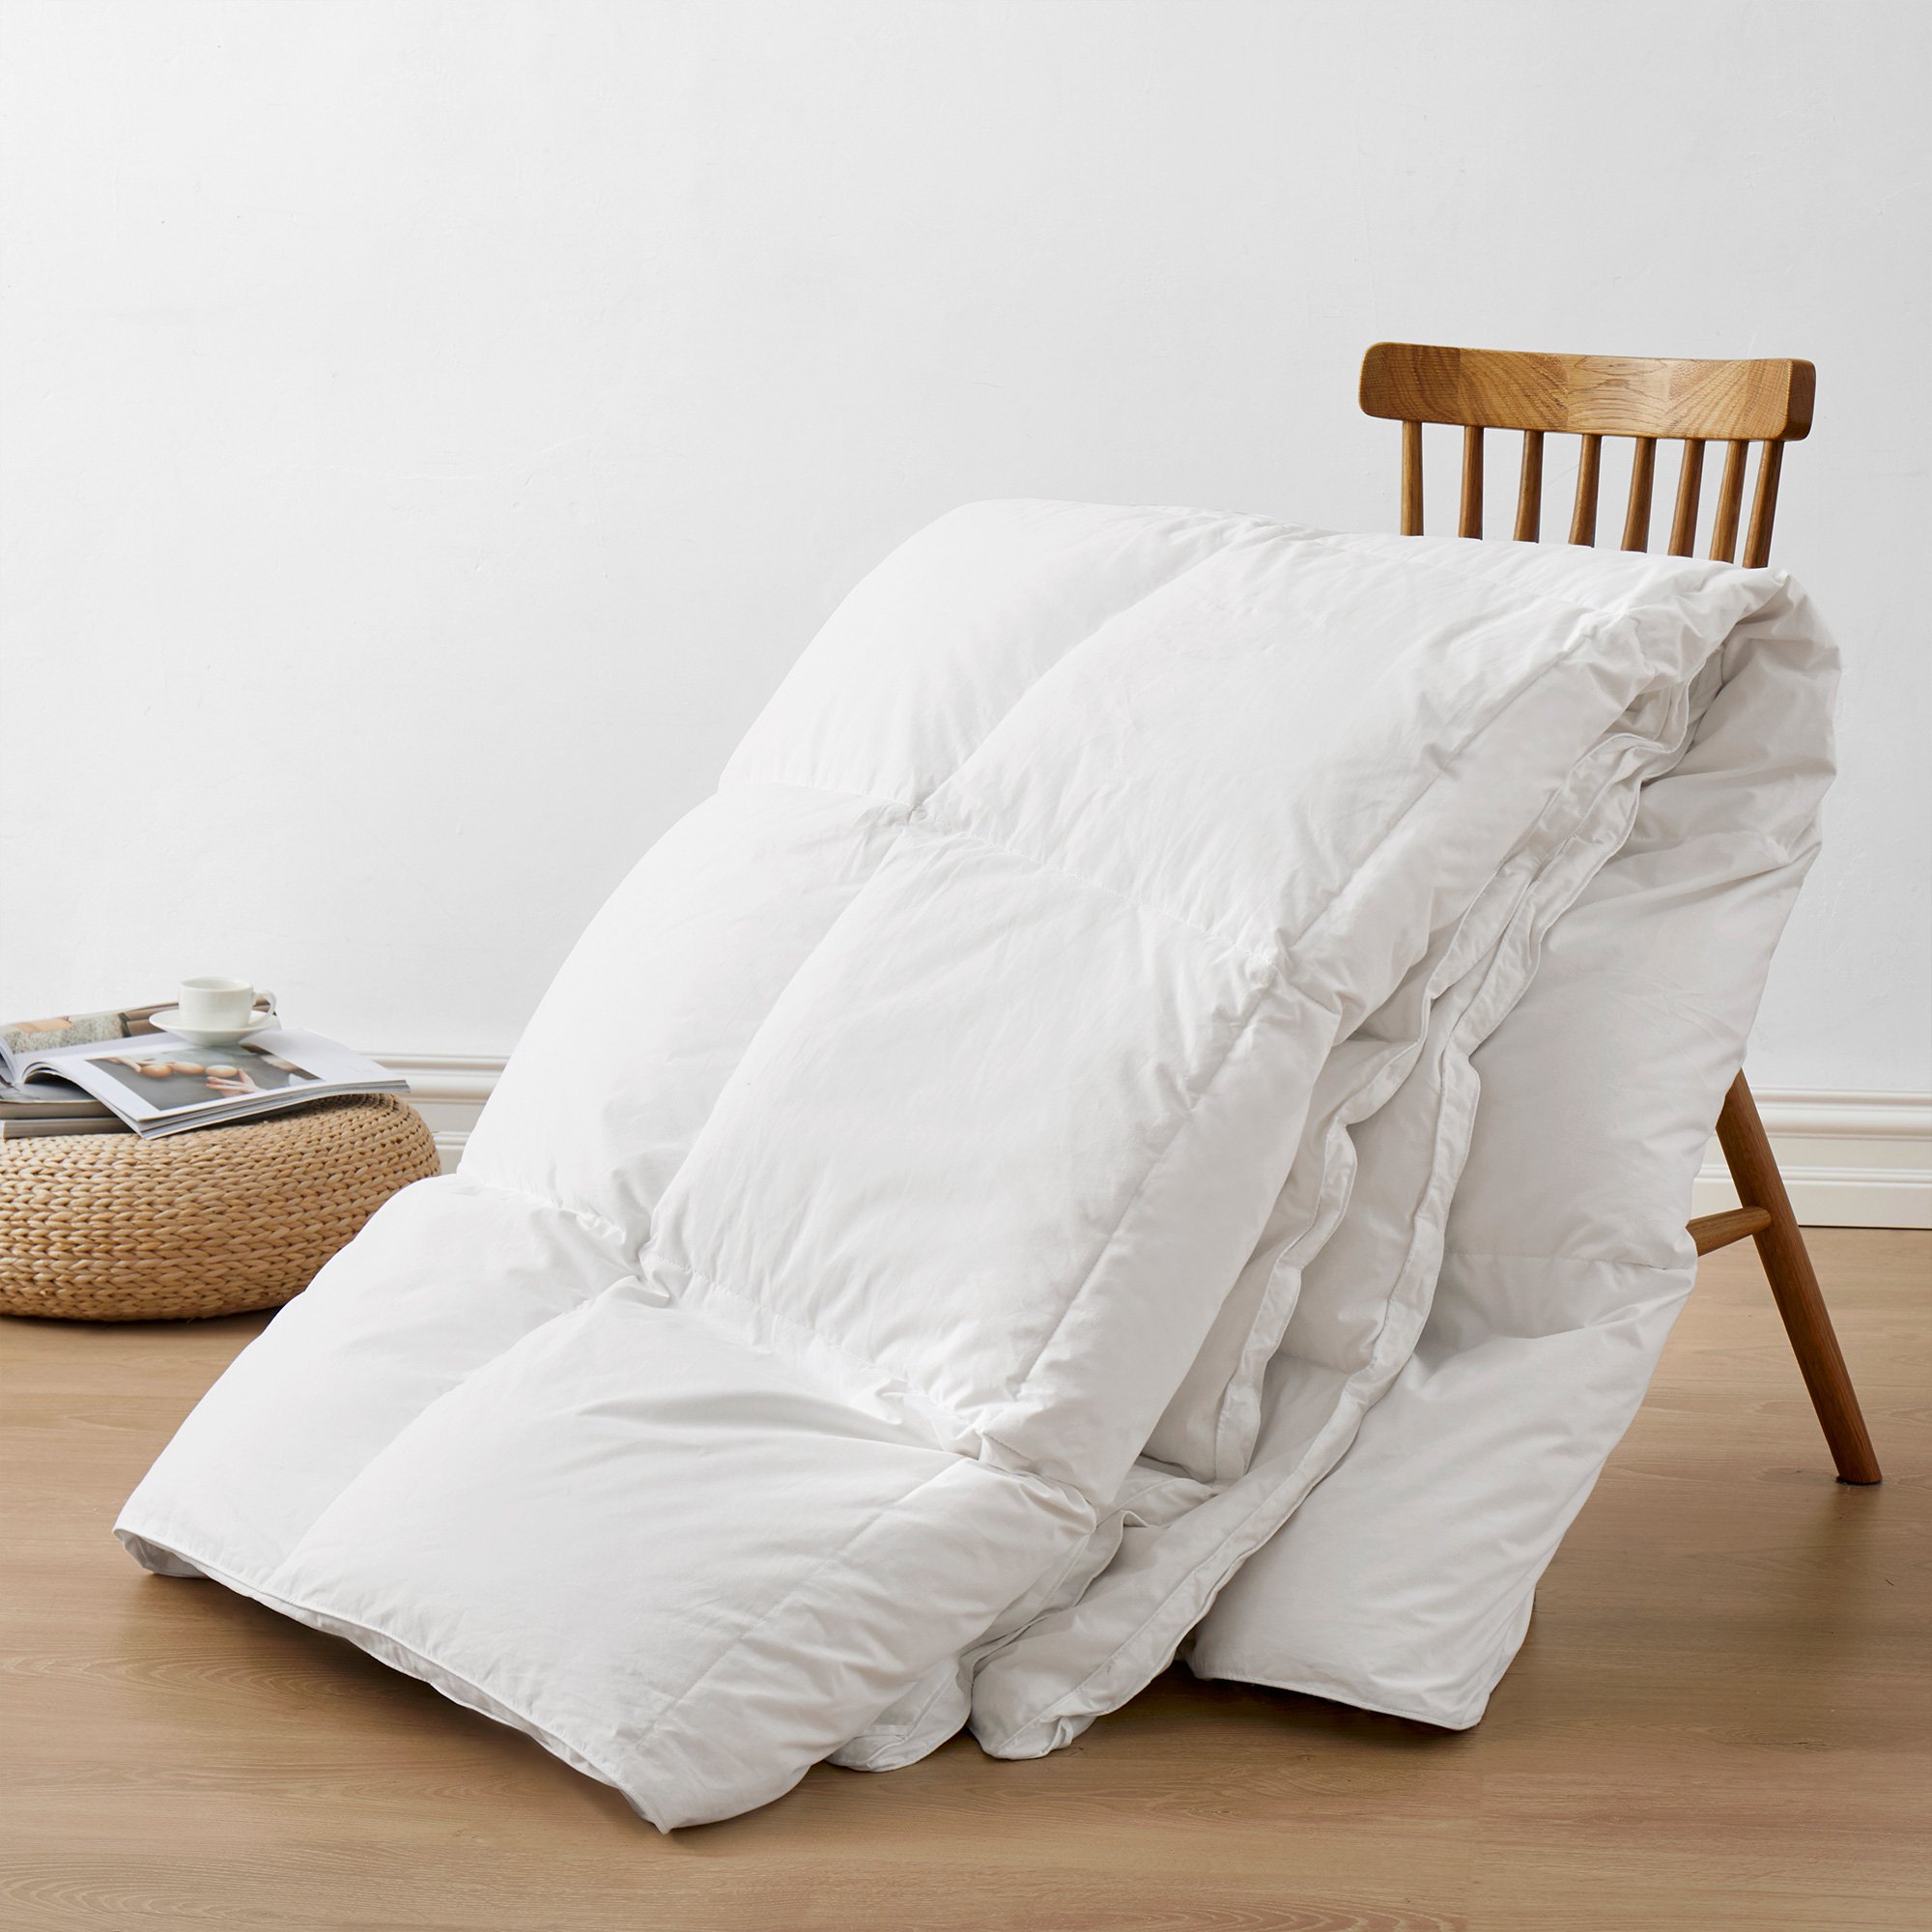 White Goose Down And Ultra Feather Comforter For Winter, Heavy Weight Comforter - FULL, White